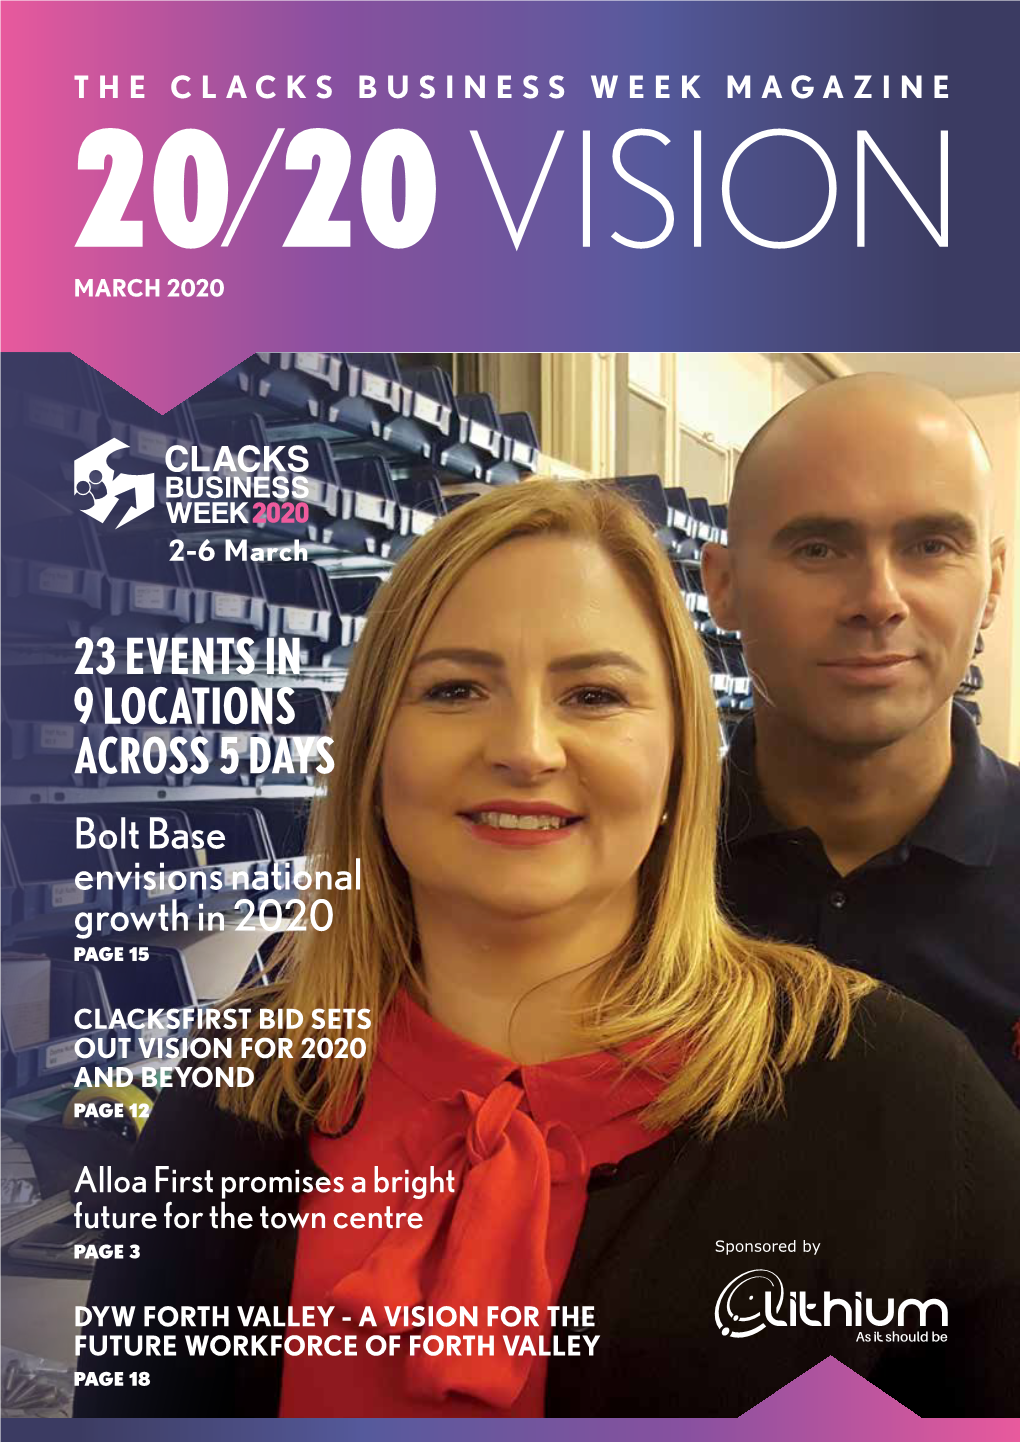 DYW FORTH VALLEY - a VISION for the FUTURE WORKFORCE of FORTH VALLEY PAGE 18 Welcome Welcome to the Clacks Business Week 2020 Magazine